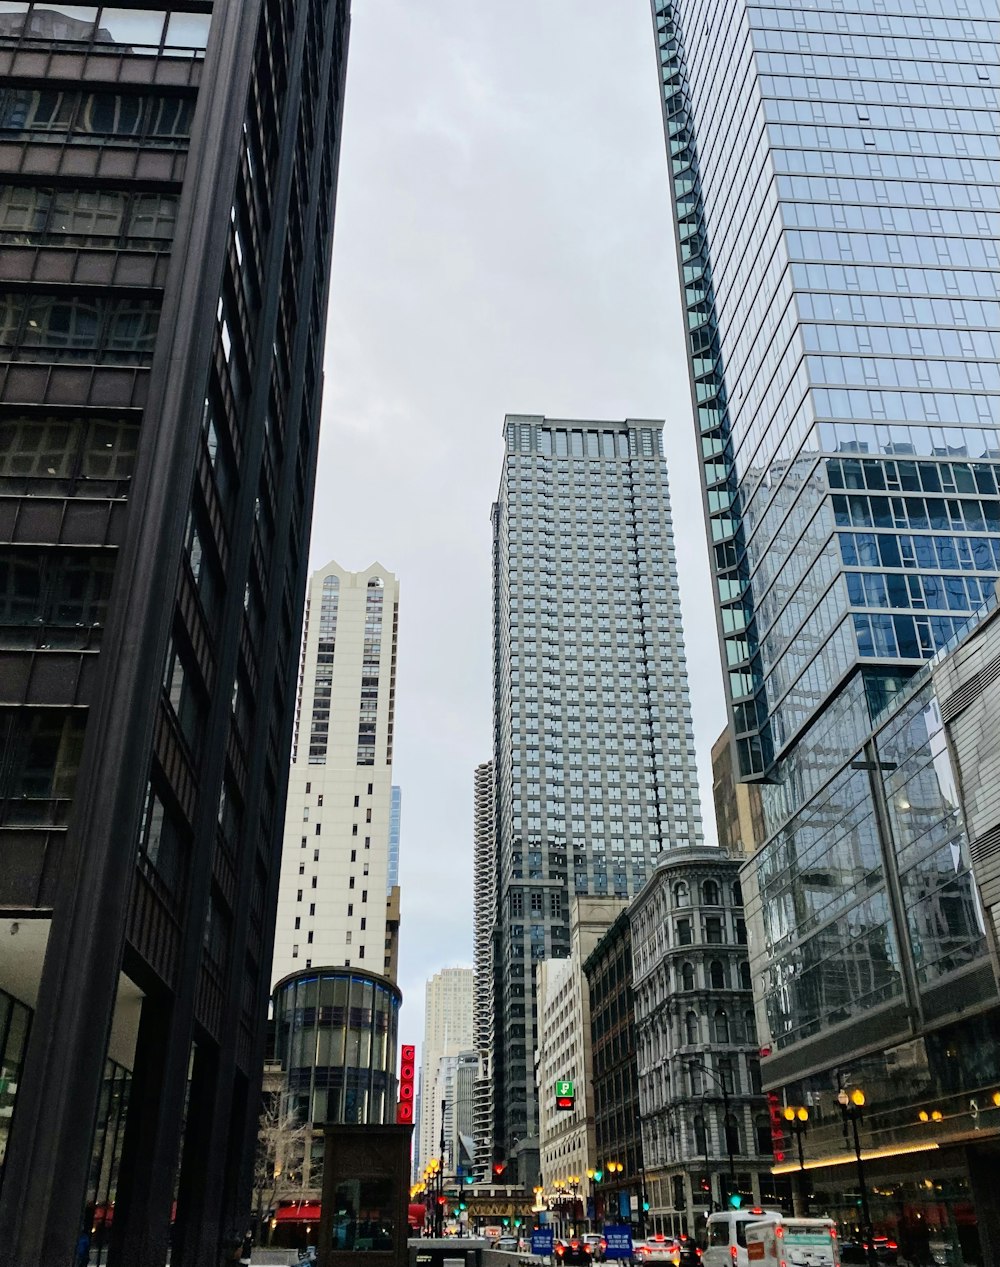 a city street filled with lots of tall buildings